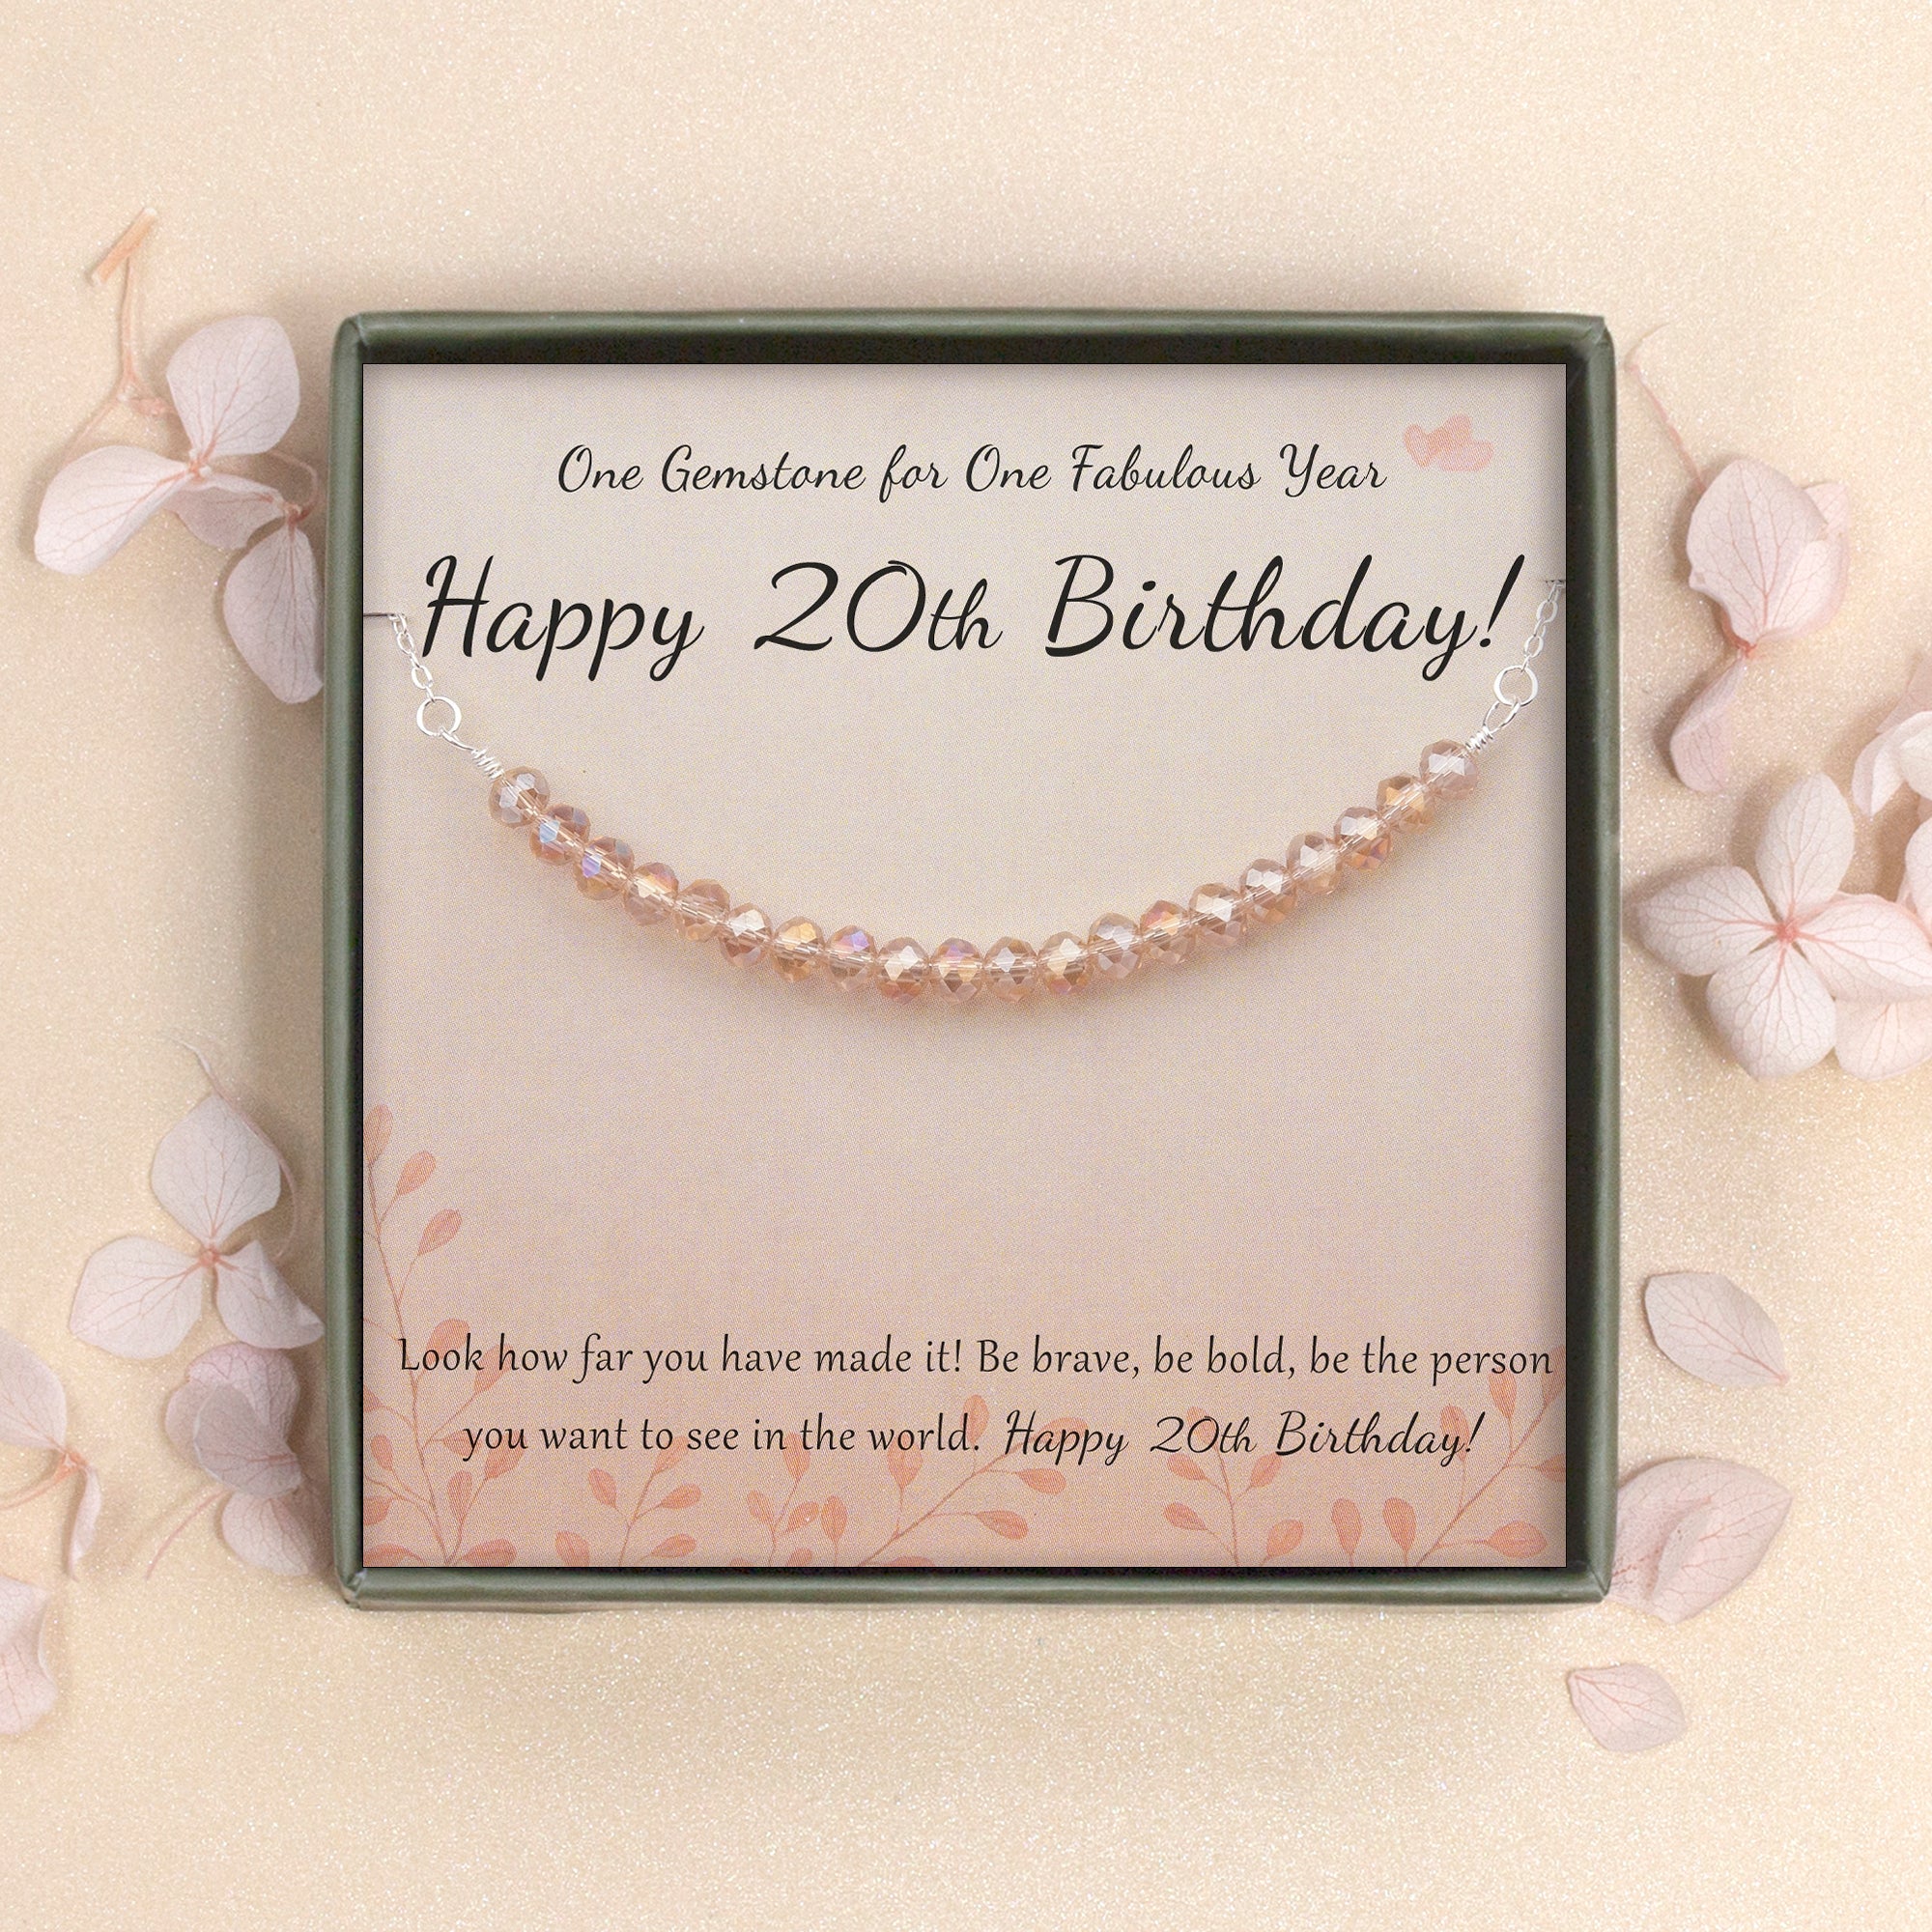 Buy 20th Birthday Decorations For Women - 20th Birthday Gifts For Women  20th Birthday Party Supplies - 20 Birthday Decorations For Women Gifts For  20 Year Old Woman Rose Gold Back In